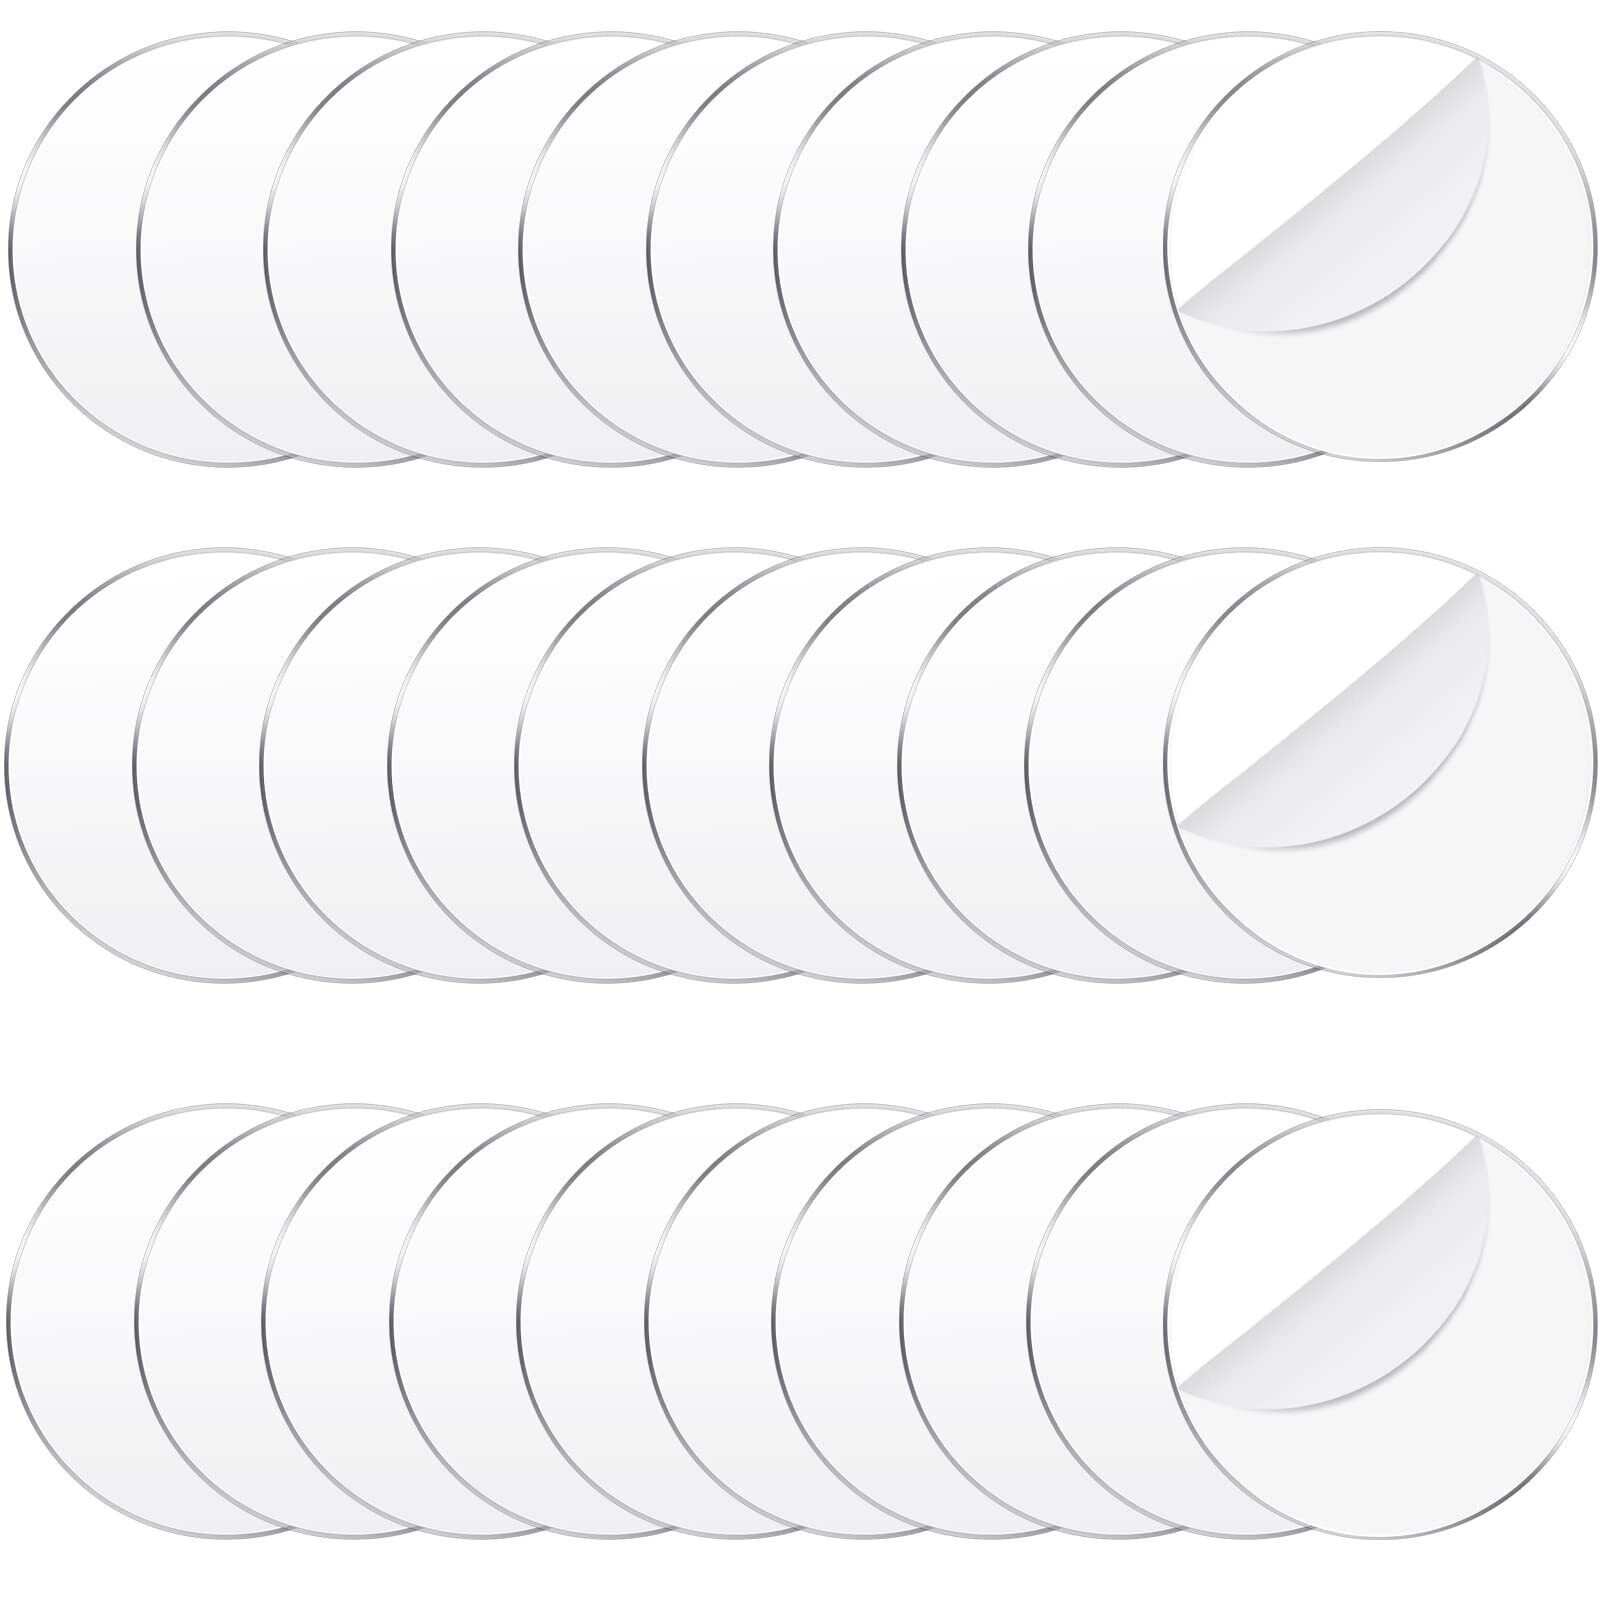 30 Pcs 4 Inch Clear Acrylic Circles Round Discs for Easter Christmas Ornament